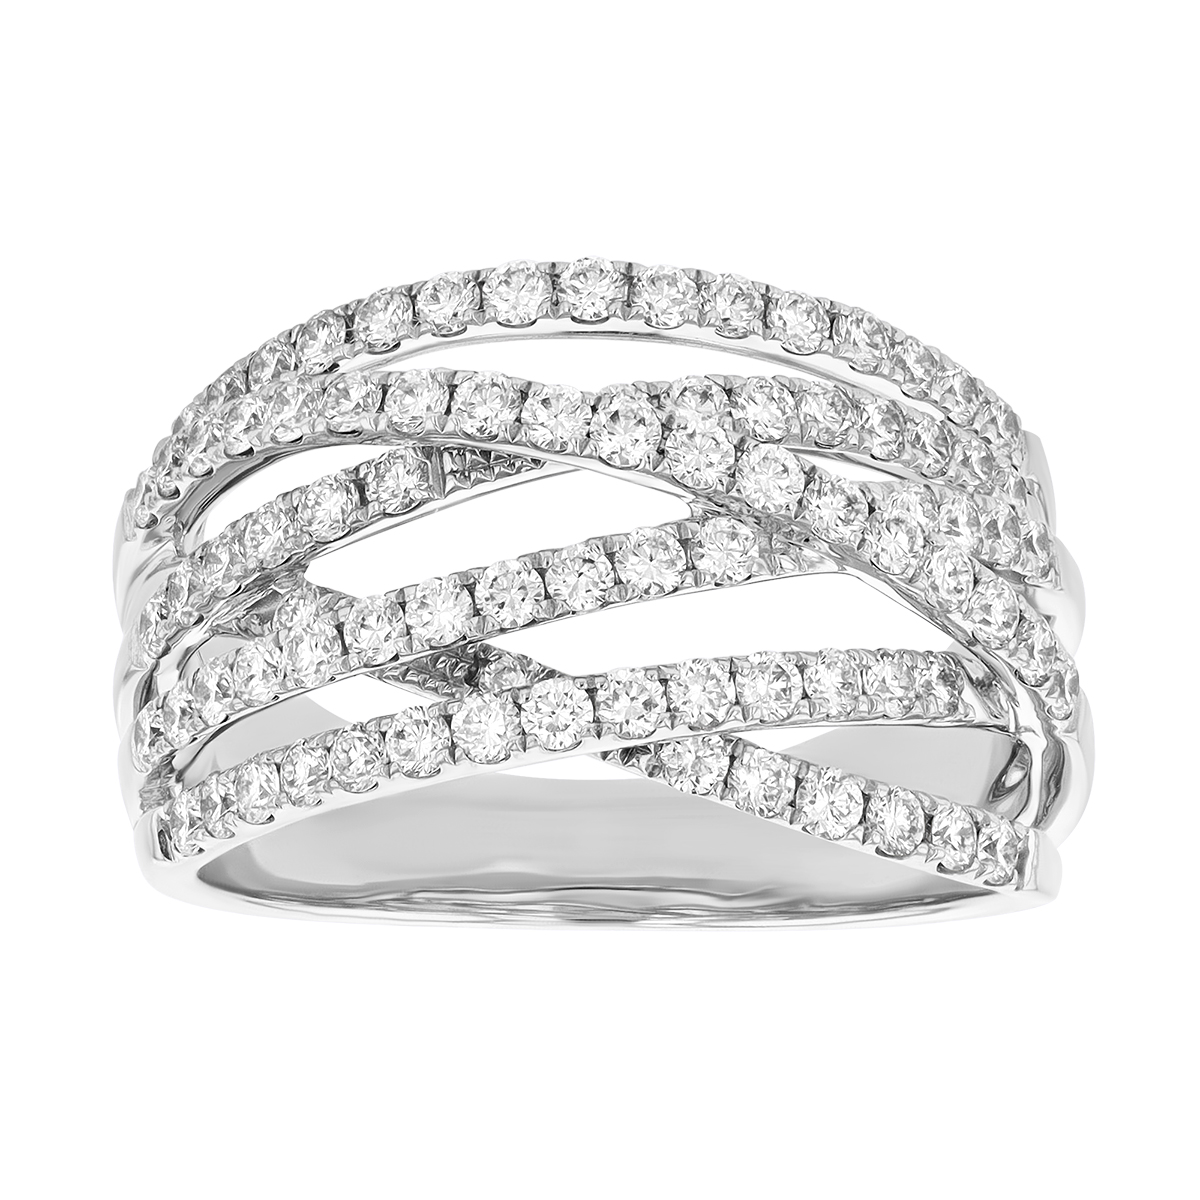 Diamond Crossover Ring in White Gold | Borsheims